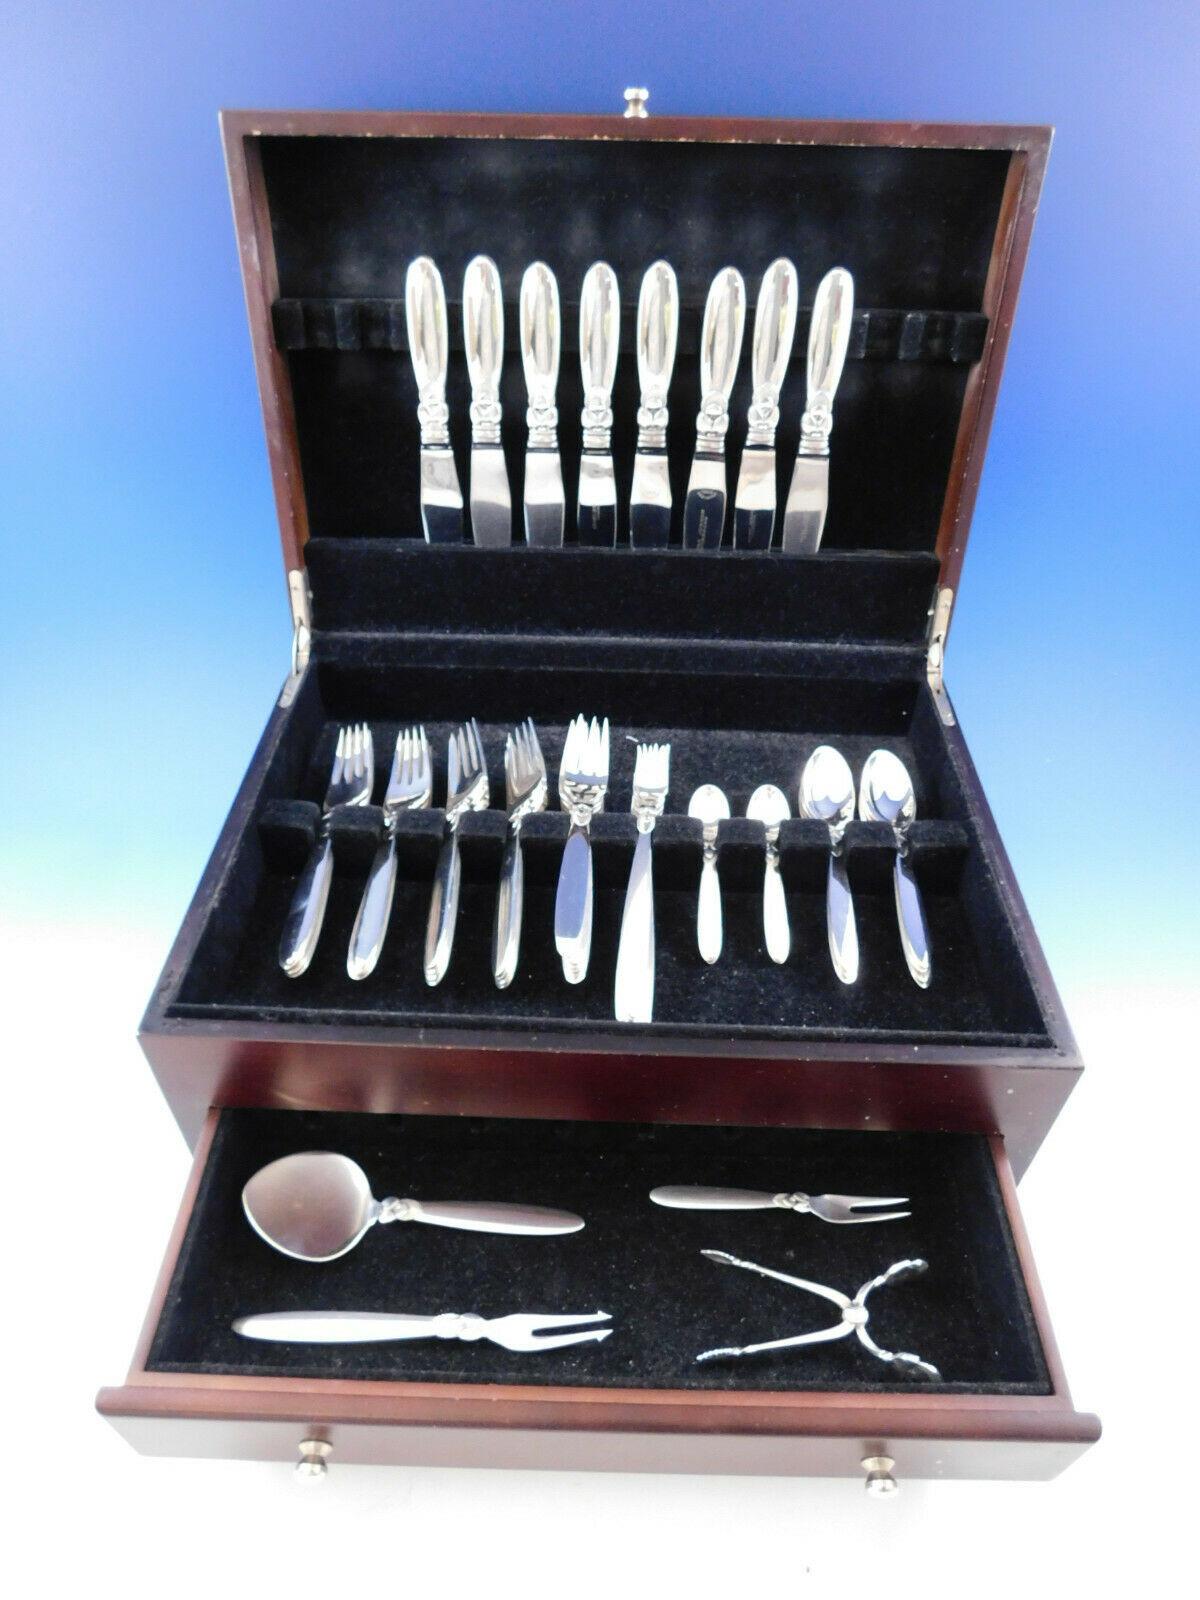 Cactus by Georg Jensen Danish sterling Silver flatware set - 60 pieces. This set includes:

8 Knives, short handle, 8